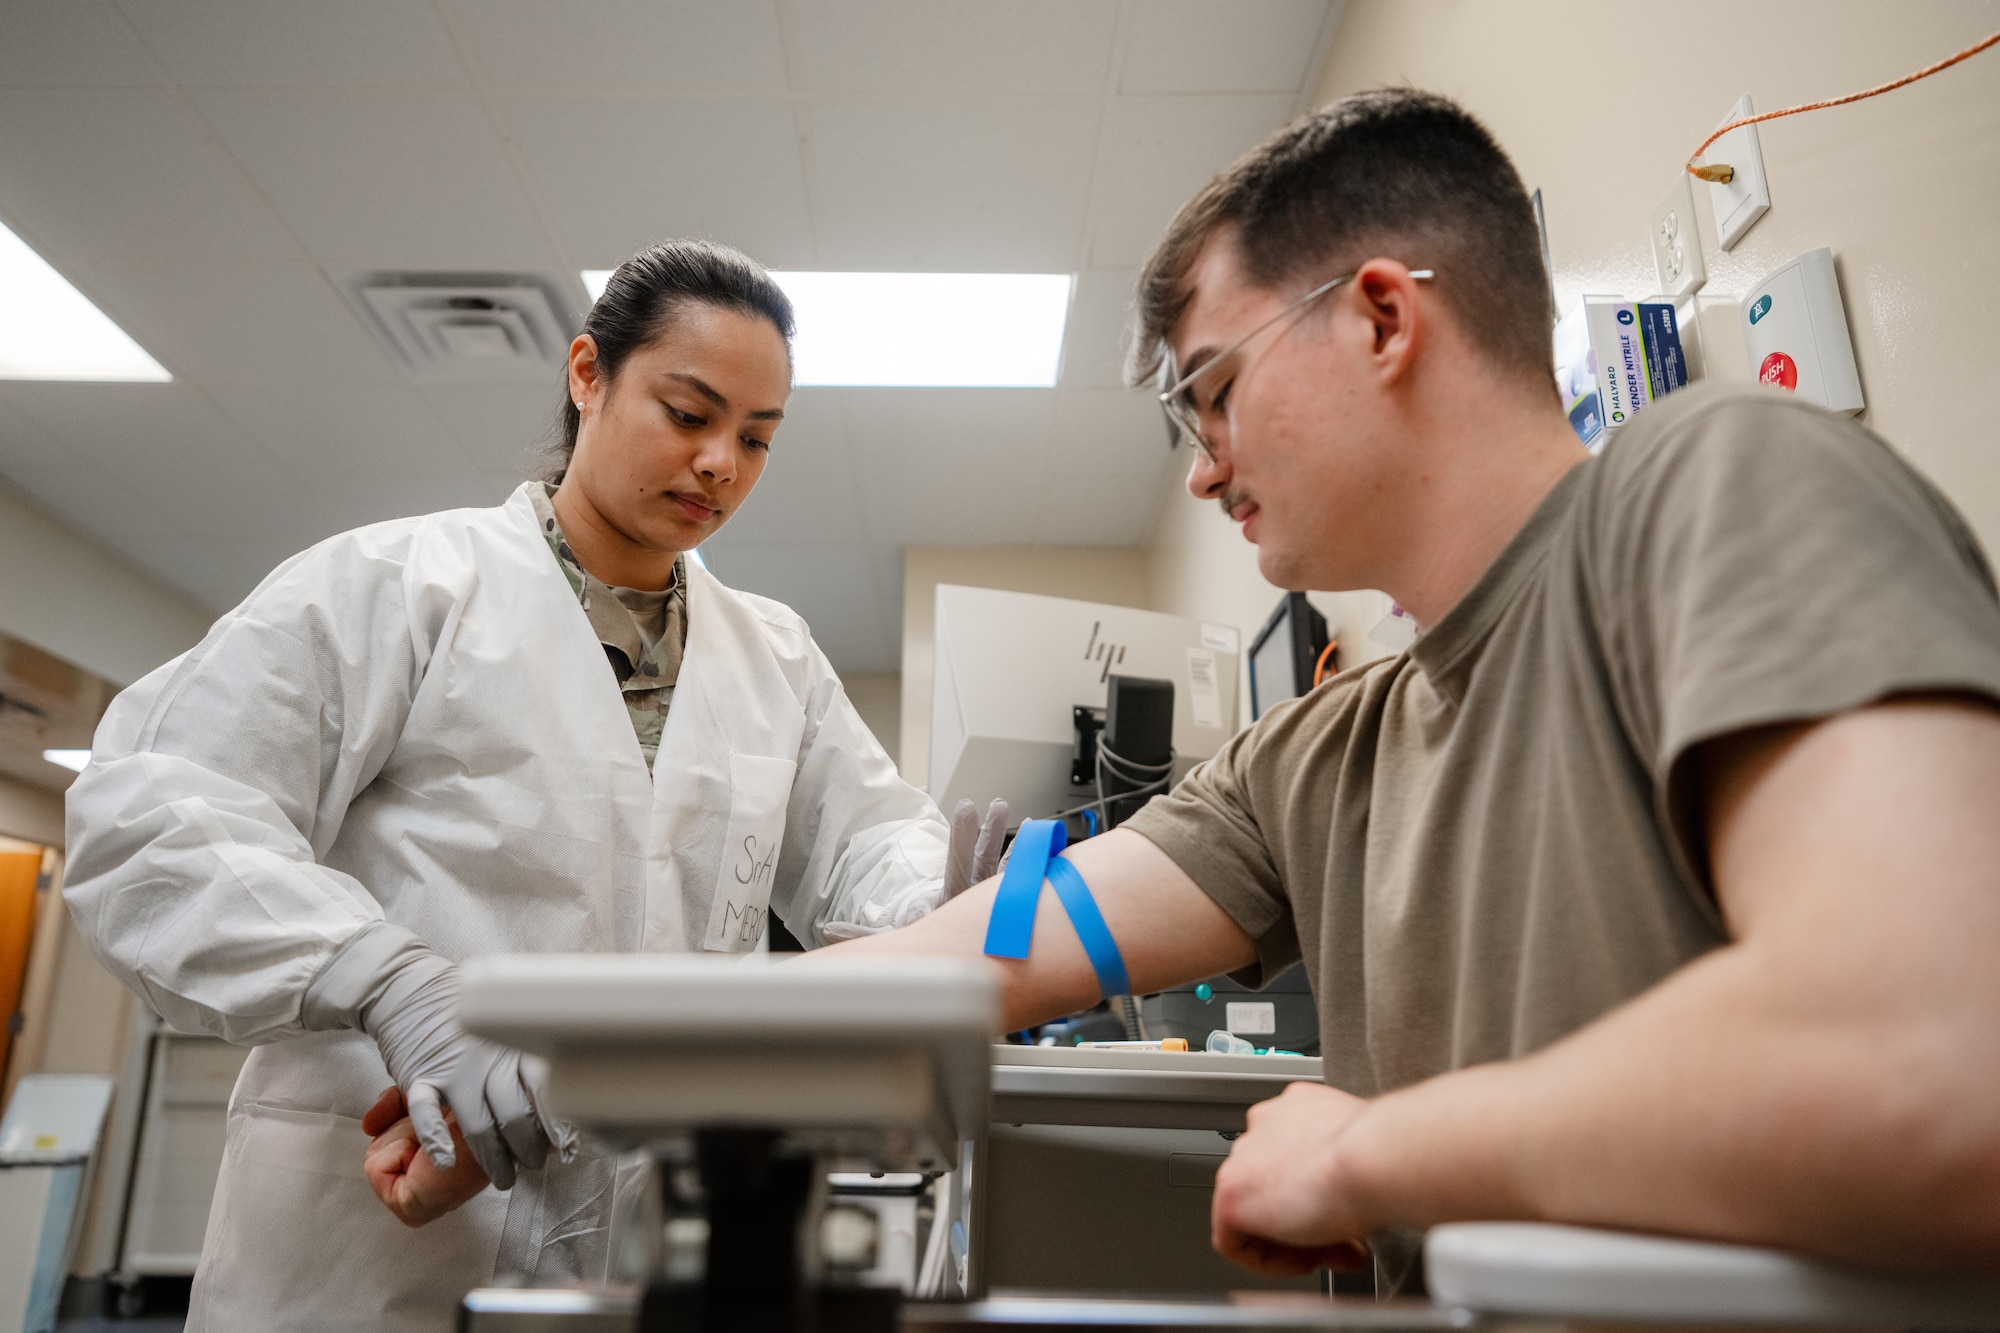 The 6th MSS laboratory oversees the shipment of more than 200 healthcare diagnostic tests per day. The new Air Force generation model (AFFORGEN) is designed for Airmen to train together and deploy together; services across MacDill AFB have adjusted their capacities to support mission requirements. (U.S. Air Force photo by Senior Airman Zachary Foster)